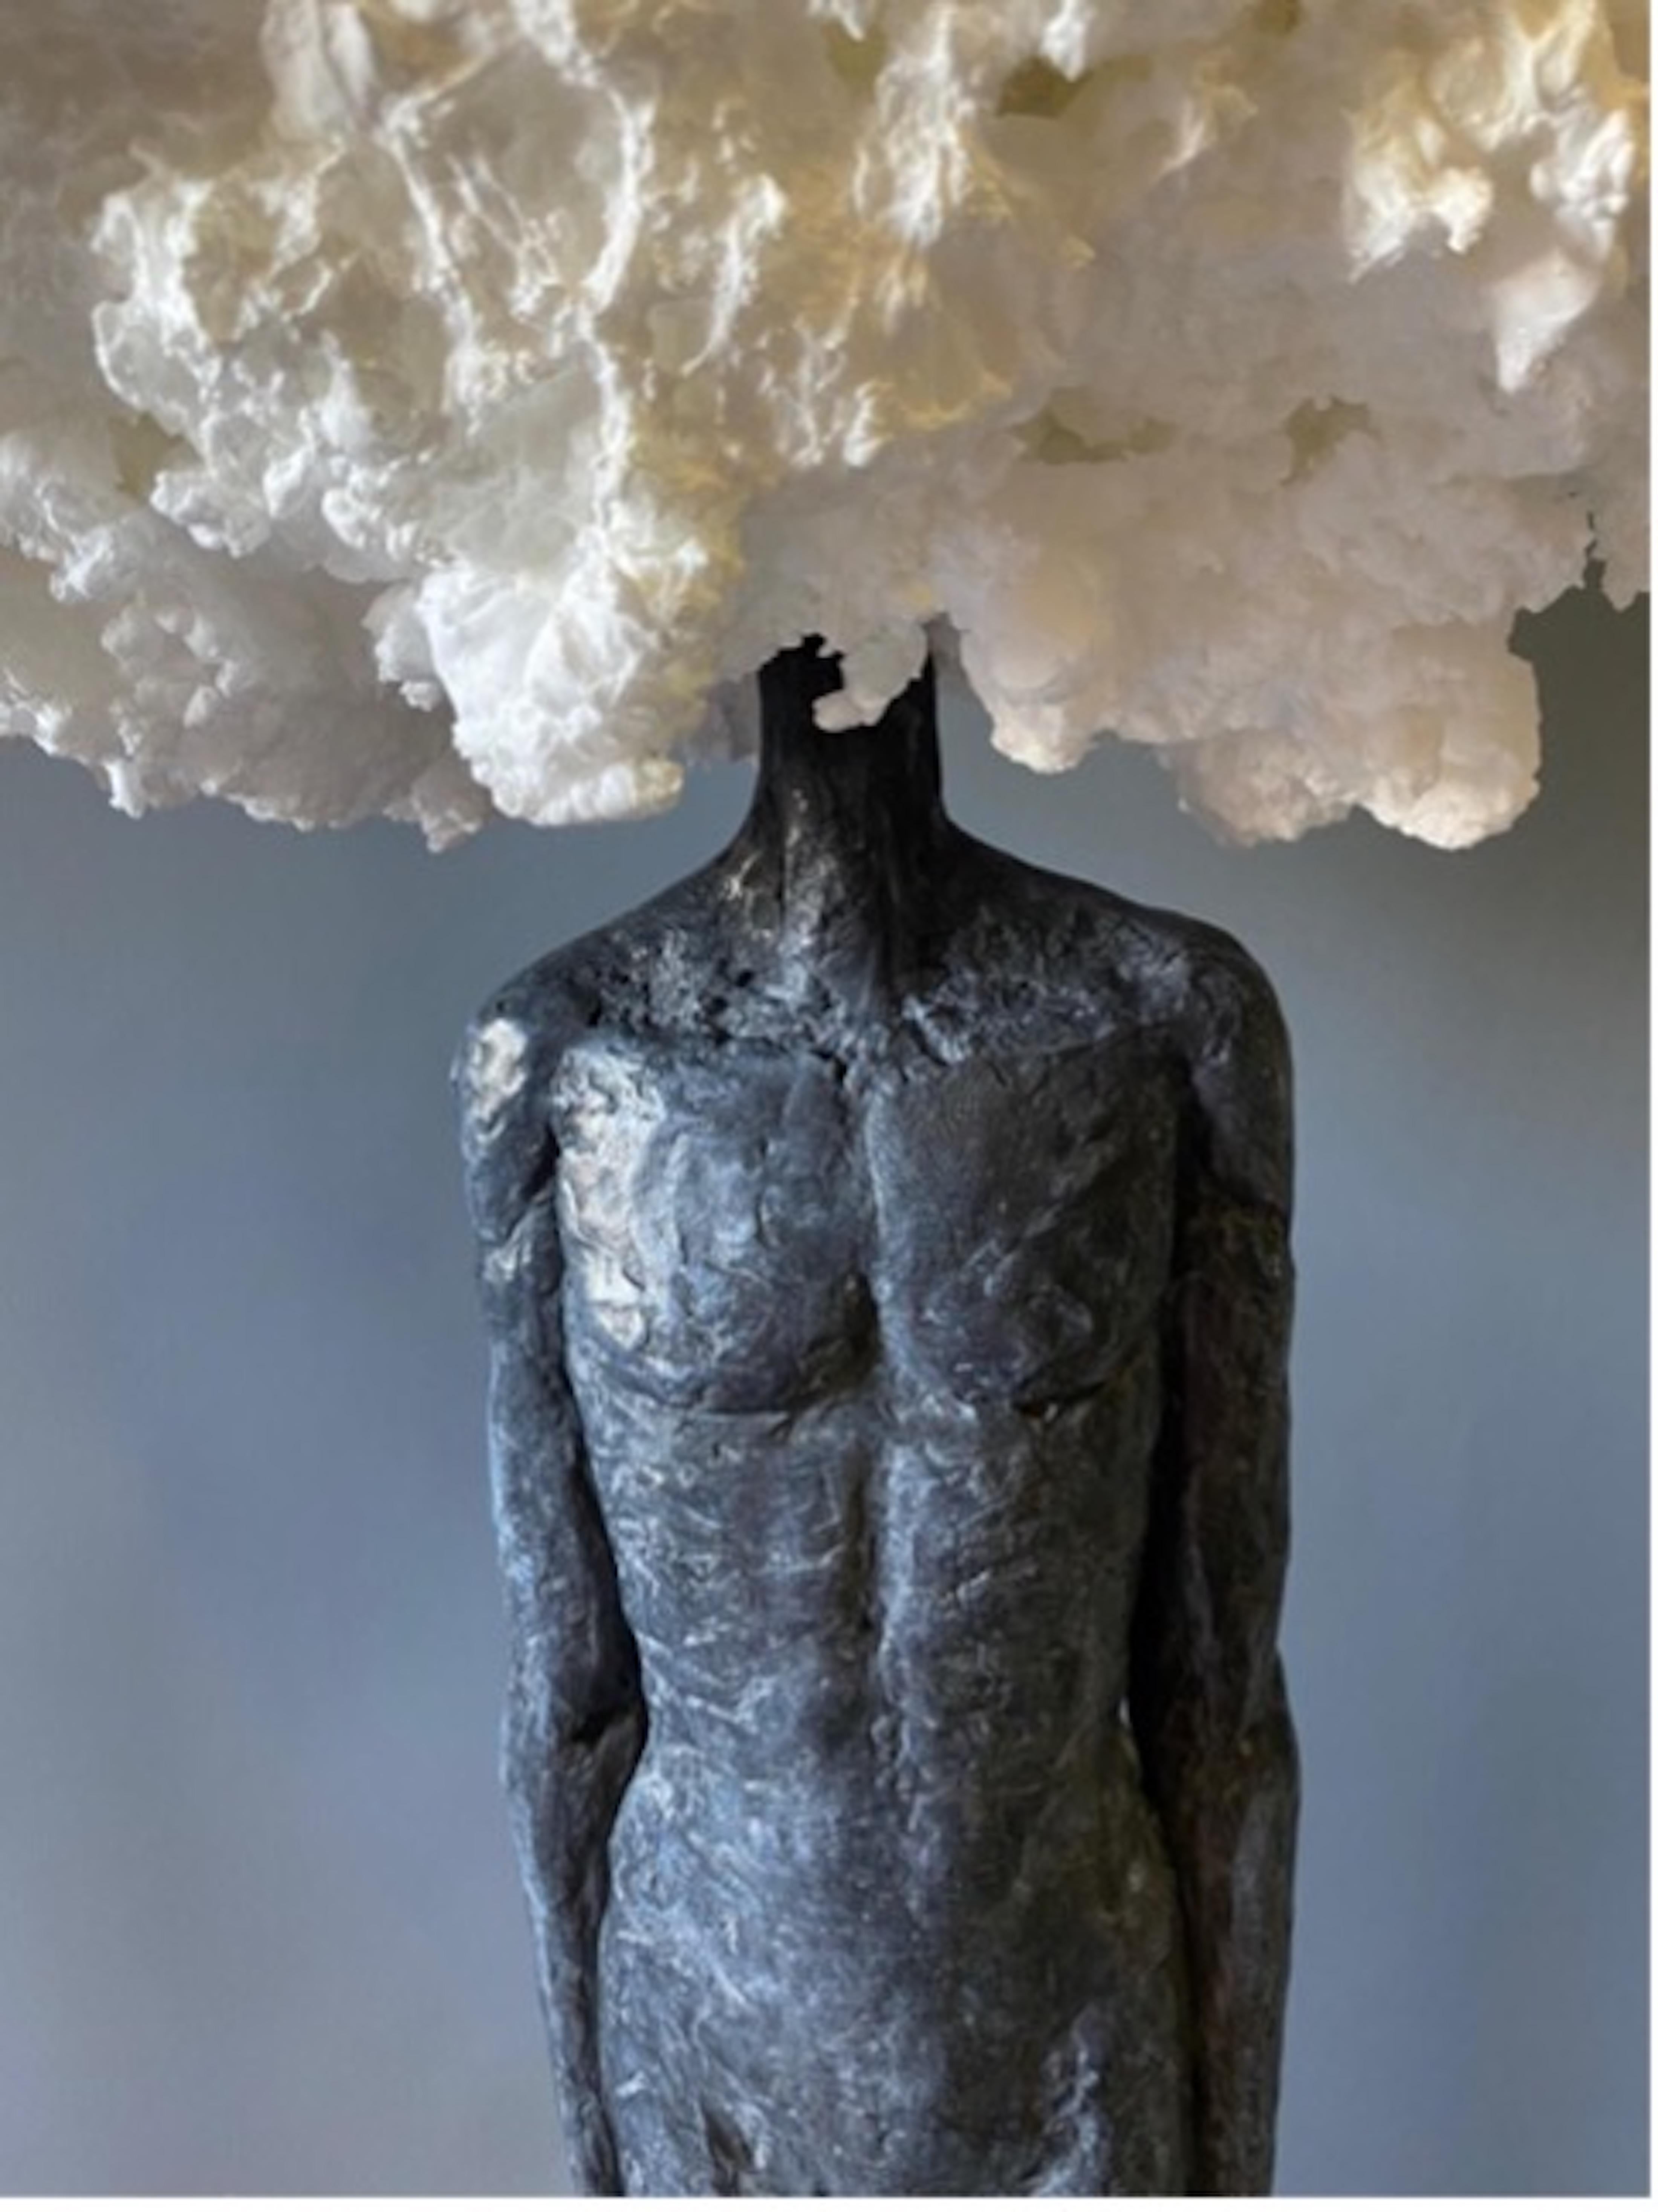 Head in the Clouds - Sculpture by Laurence Perratzi